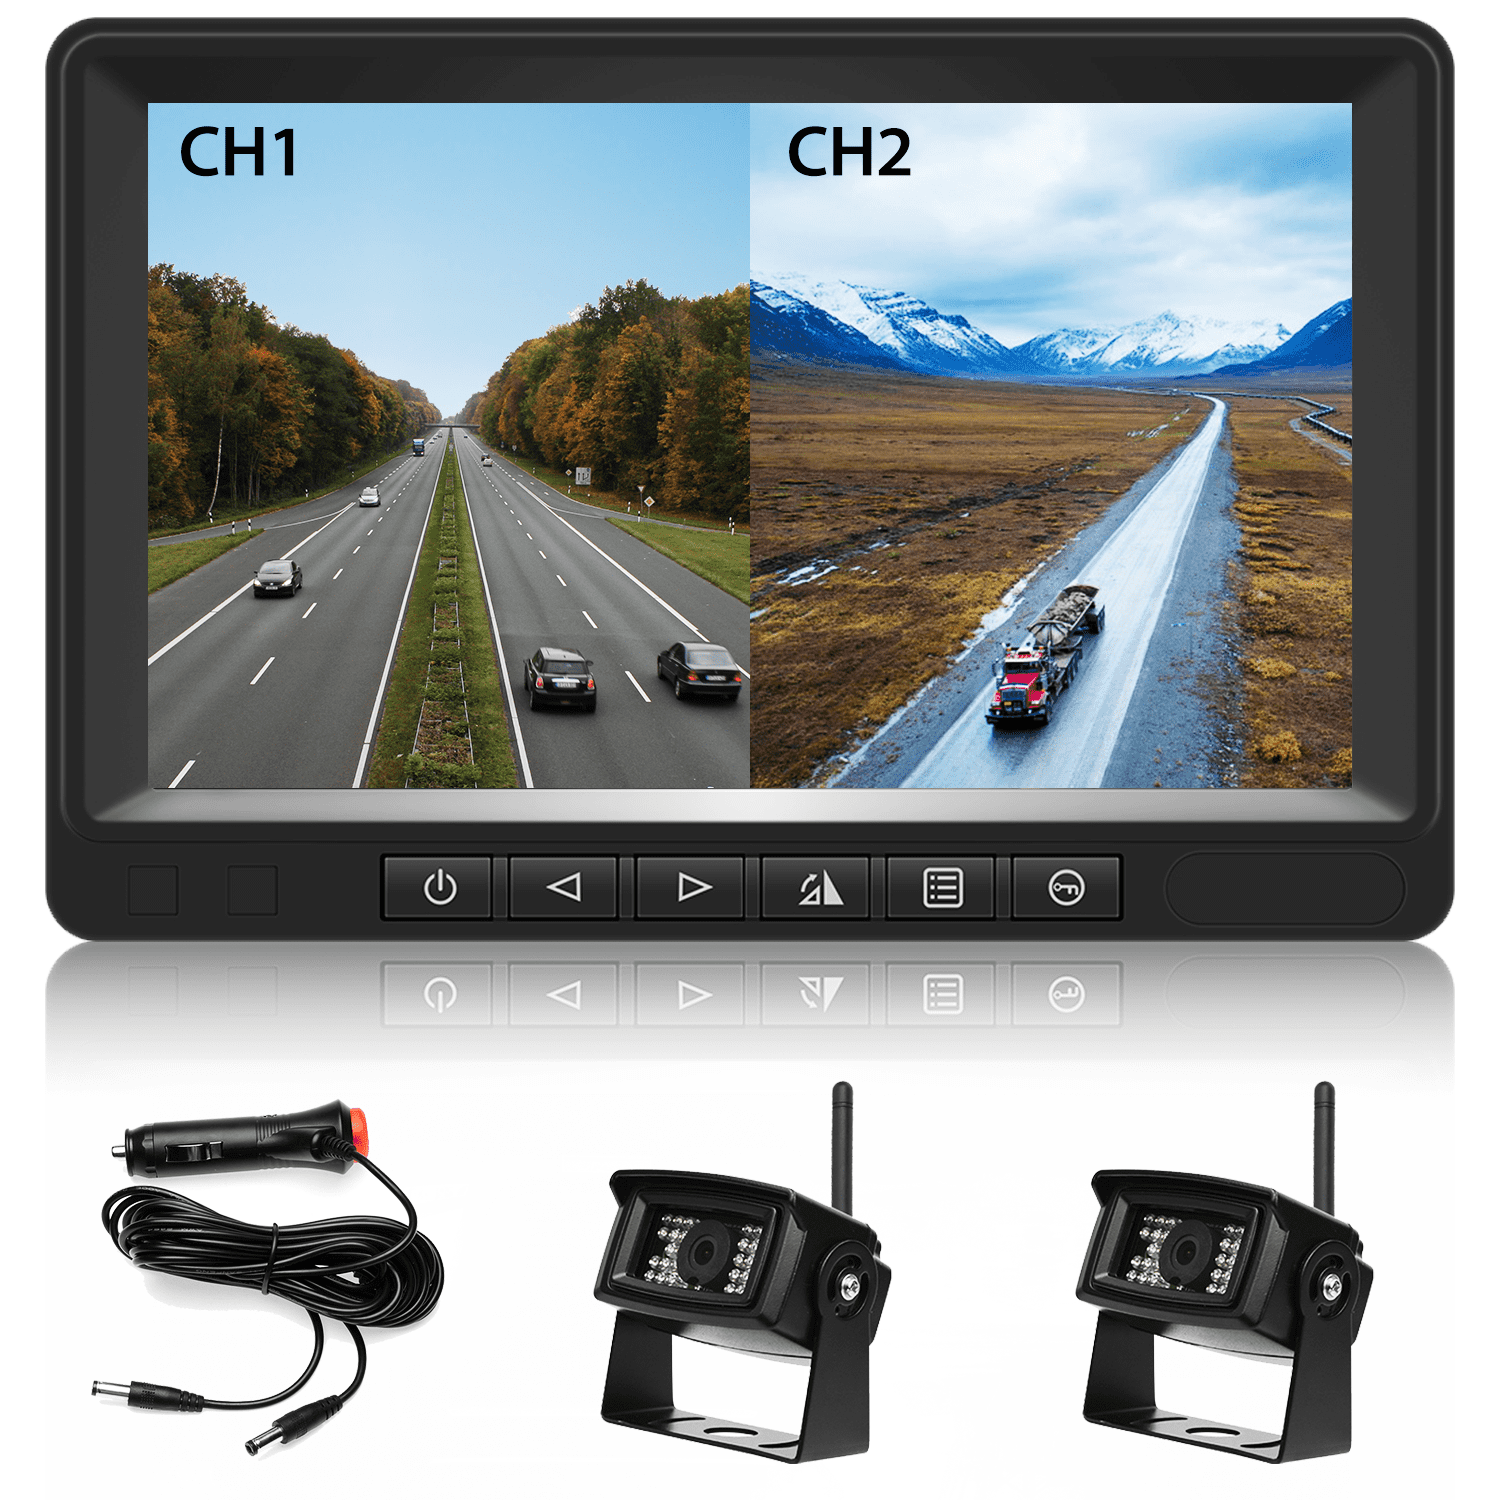 7" DIGITAL REAR VIEW BACKUP REVERSE CAMERA SYSTEM SAFETY FOR TRUCK TRACTOR RV 